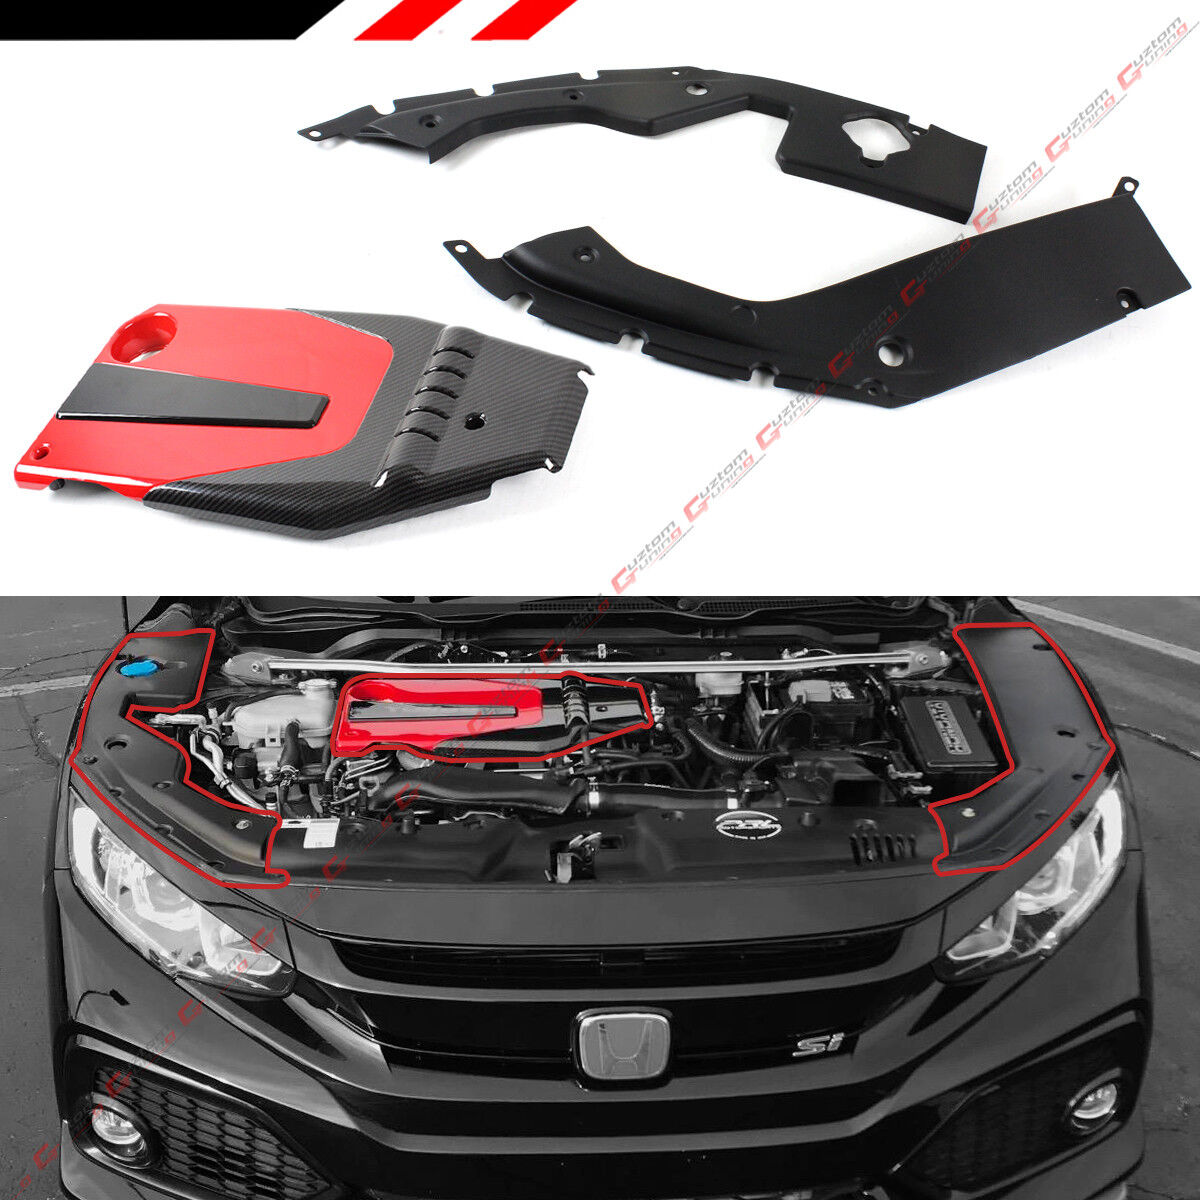 FOR 16-2021 HONDA CIVIC JDM RED BLK TYPE-R STYLE ENGINE COVER + SIDE PANEL COVER